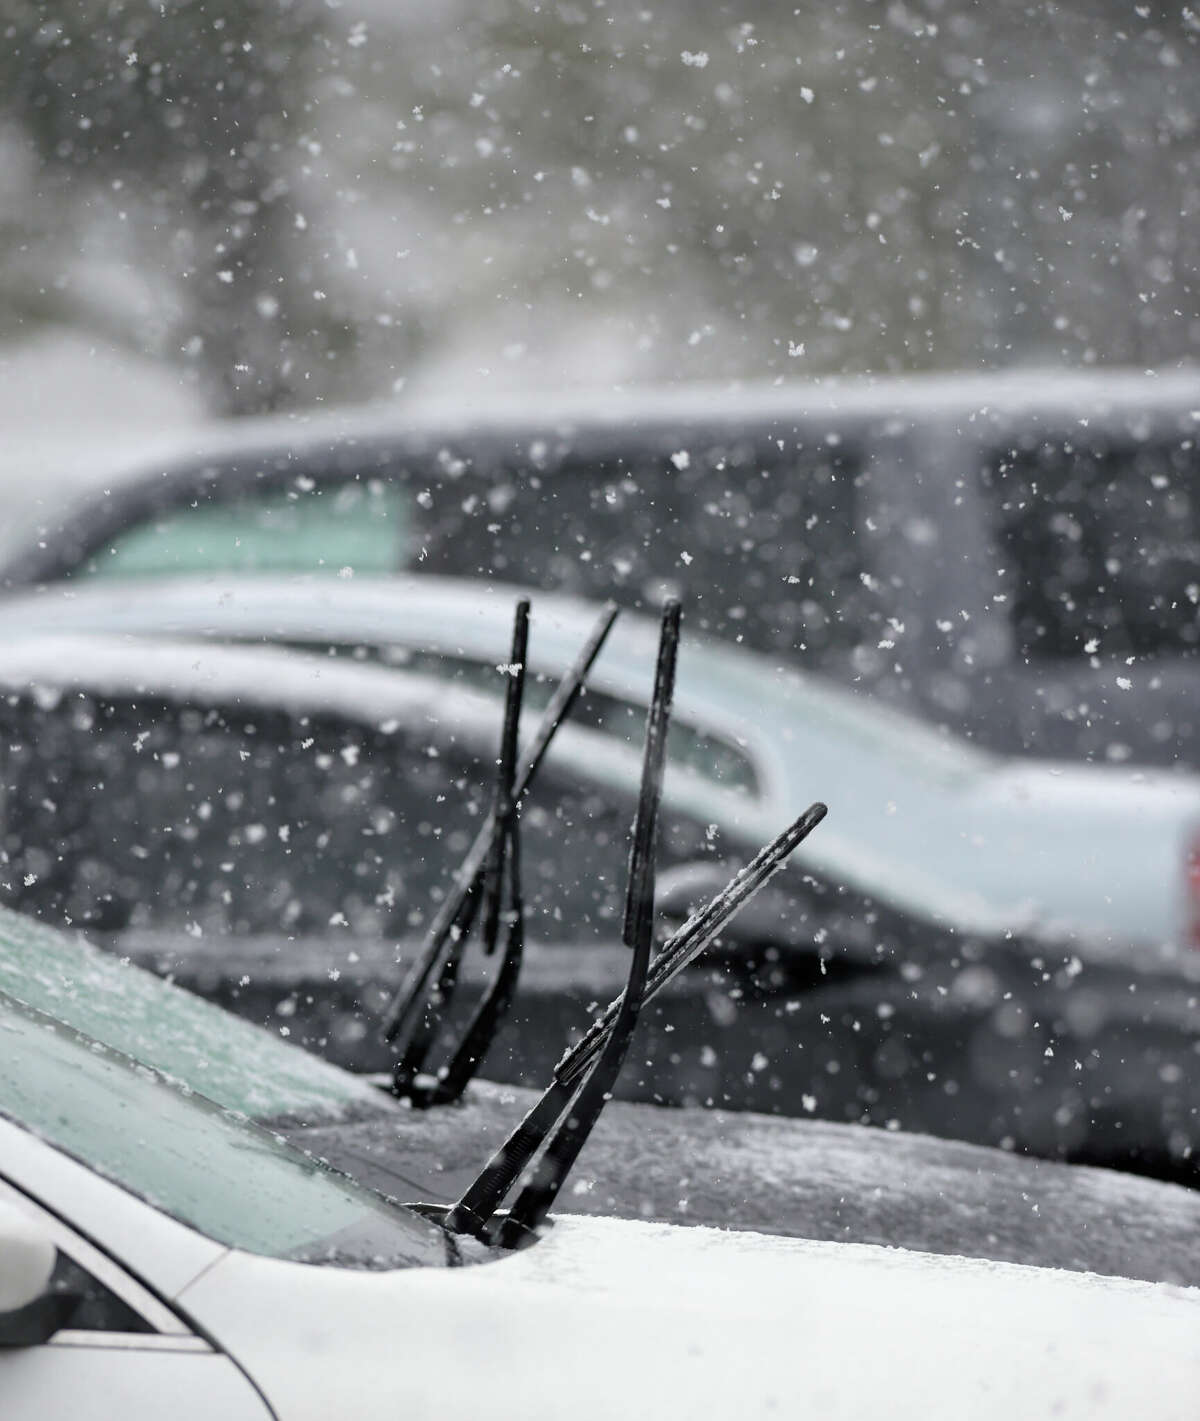 Cars parked at the War Memorial with their wipers up in preparation for the wet snow that fell in the Danbury area on Wednesday afternoon. January 25, 2023, Danbury, Conn.